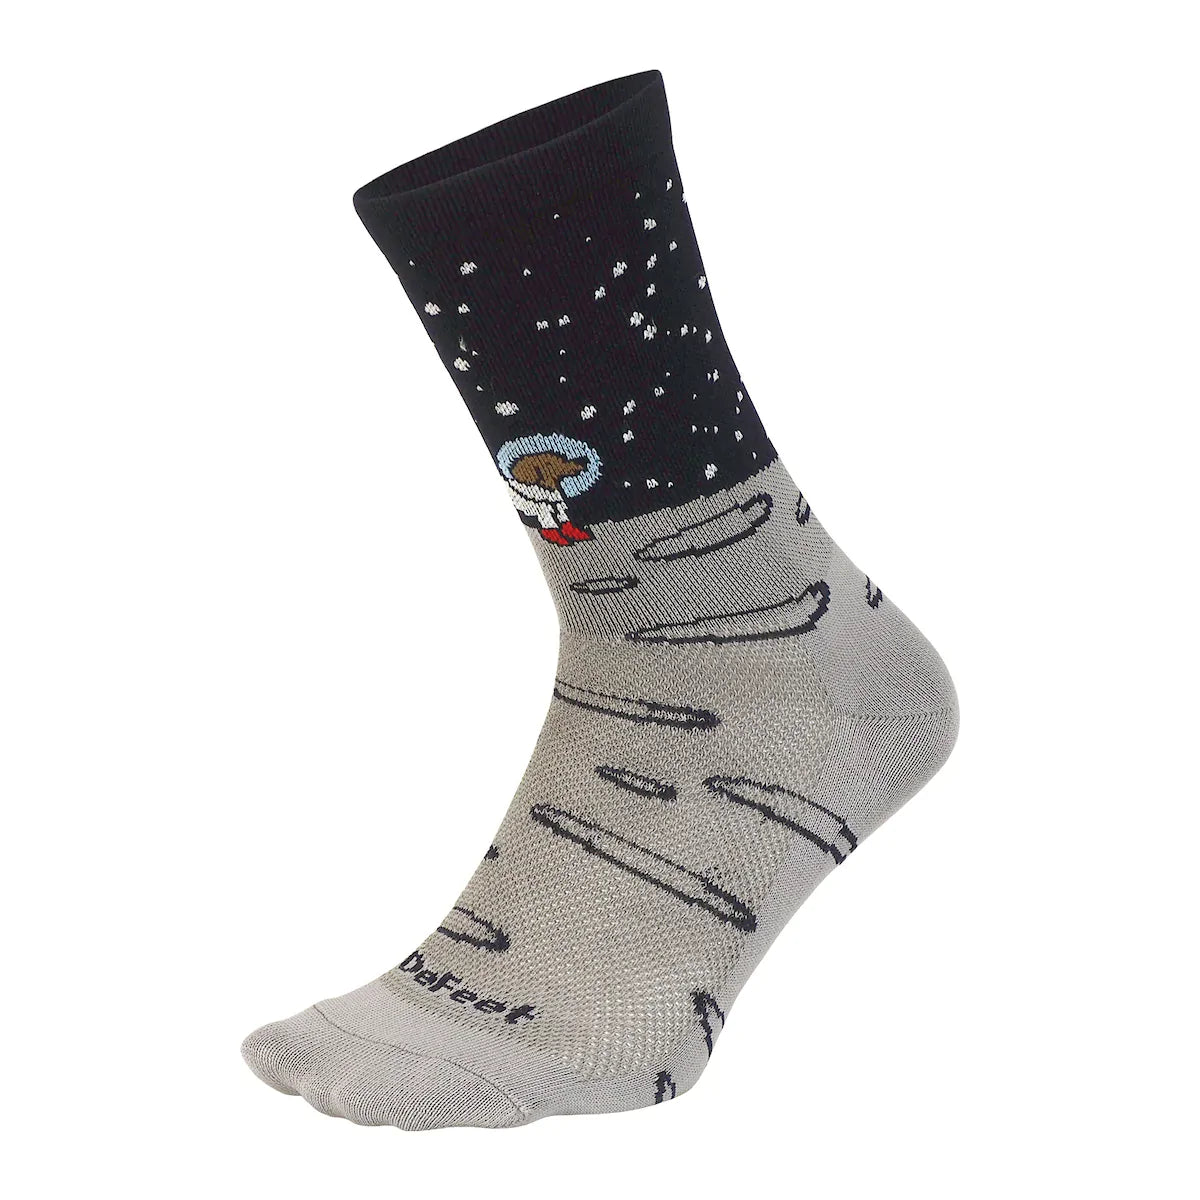 DeFeet Aireator 6" Moon Doggo cycling sock in navy and gray with astronaut dog in space on the cuff.